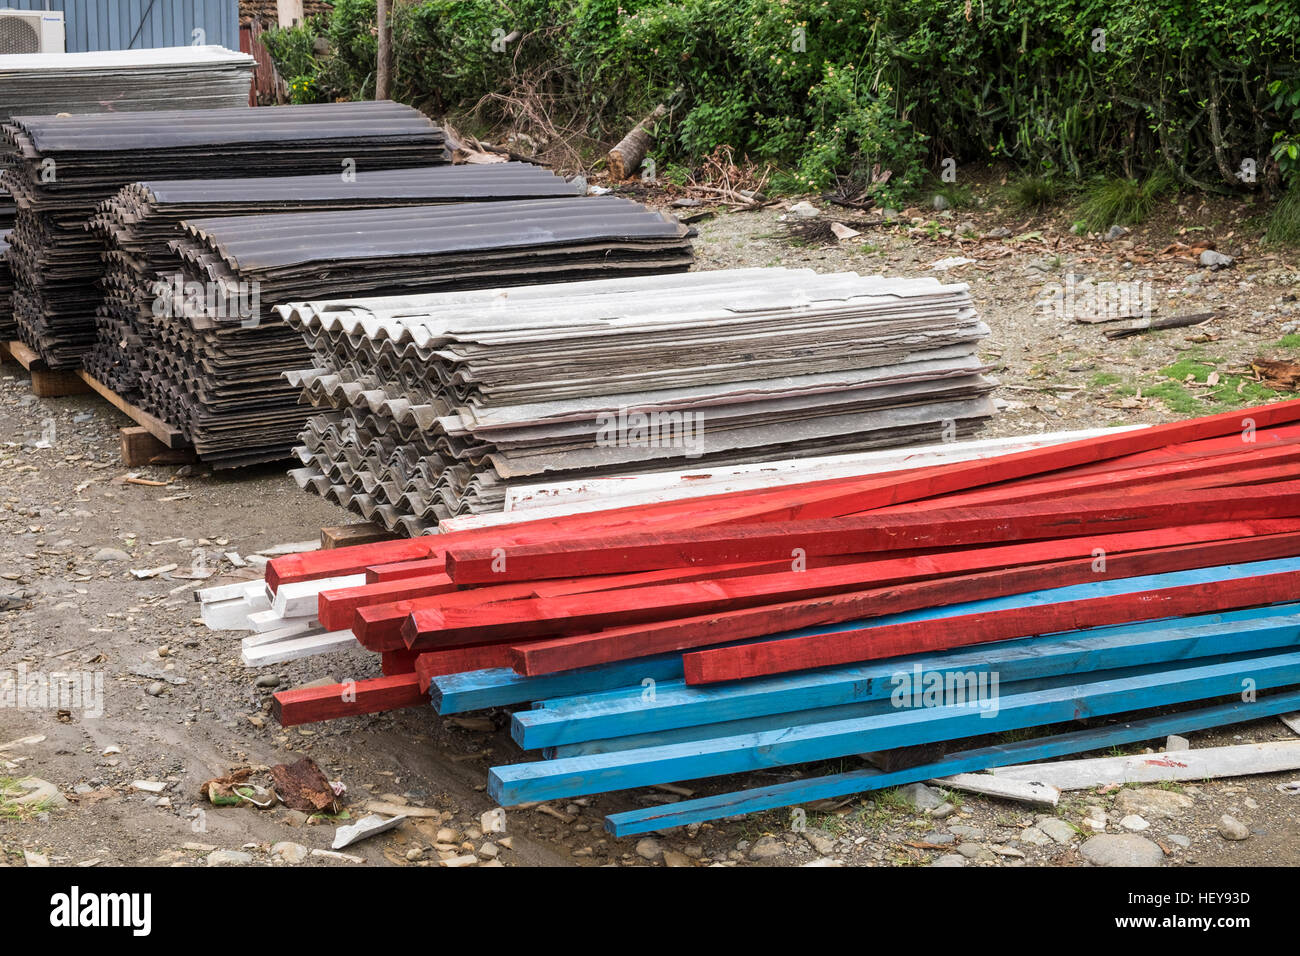 Asbestos sheeting to be used for roofing as part of the relief effort after hurricane Mathew, Yomuri, Baracoa, Cuba Stock Photo